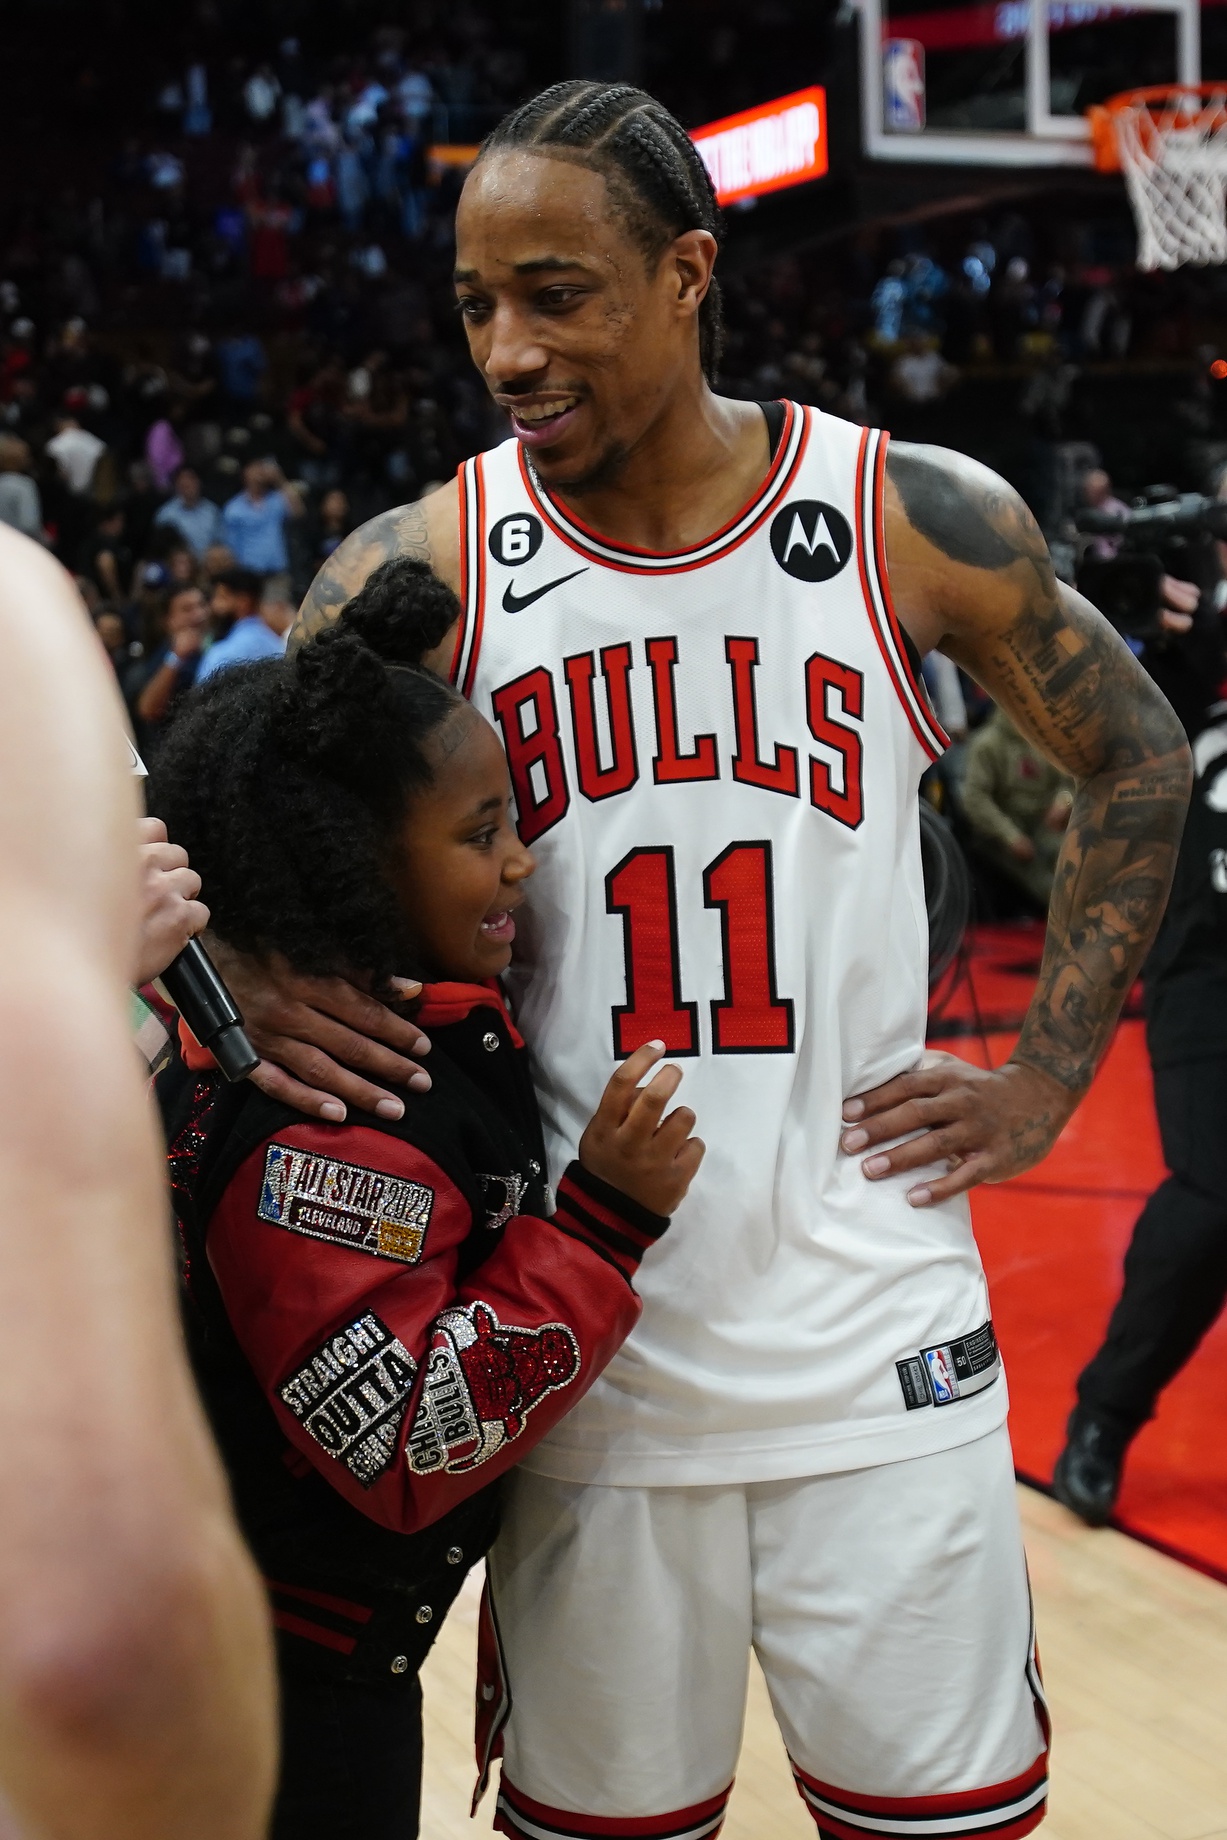 Demar DeRozan's legacy: Apr 12, 2023; Toronto, Ontario, CAN; Chicago Bulls forward DeMar DeRozan (11) gets a hug from his daughter after a win over the Toronto Raptors in the NBA Play-In game at Scotiabank Arena. Mandatory Credit: John E. Sokolowski-USA TODAY Sports